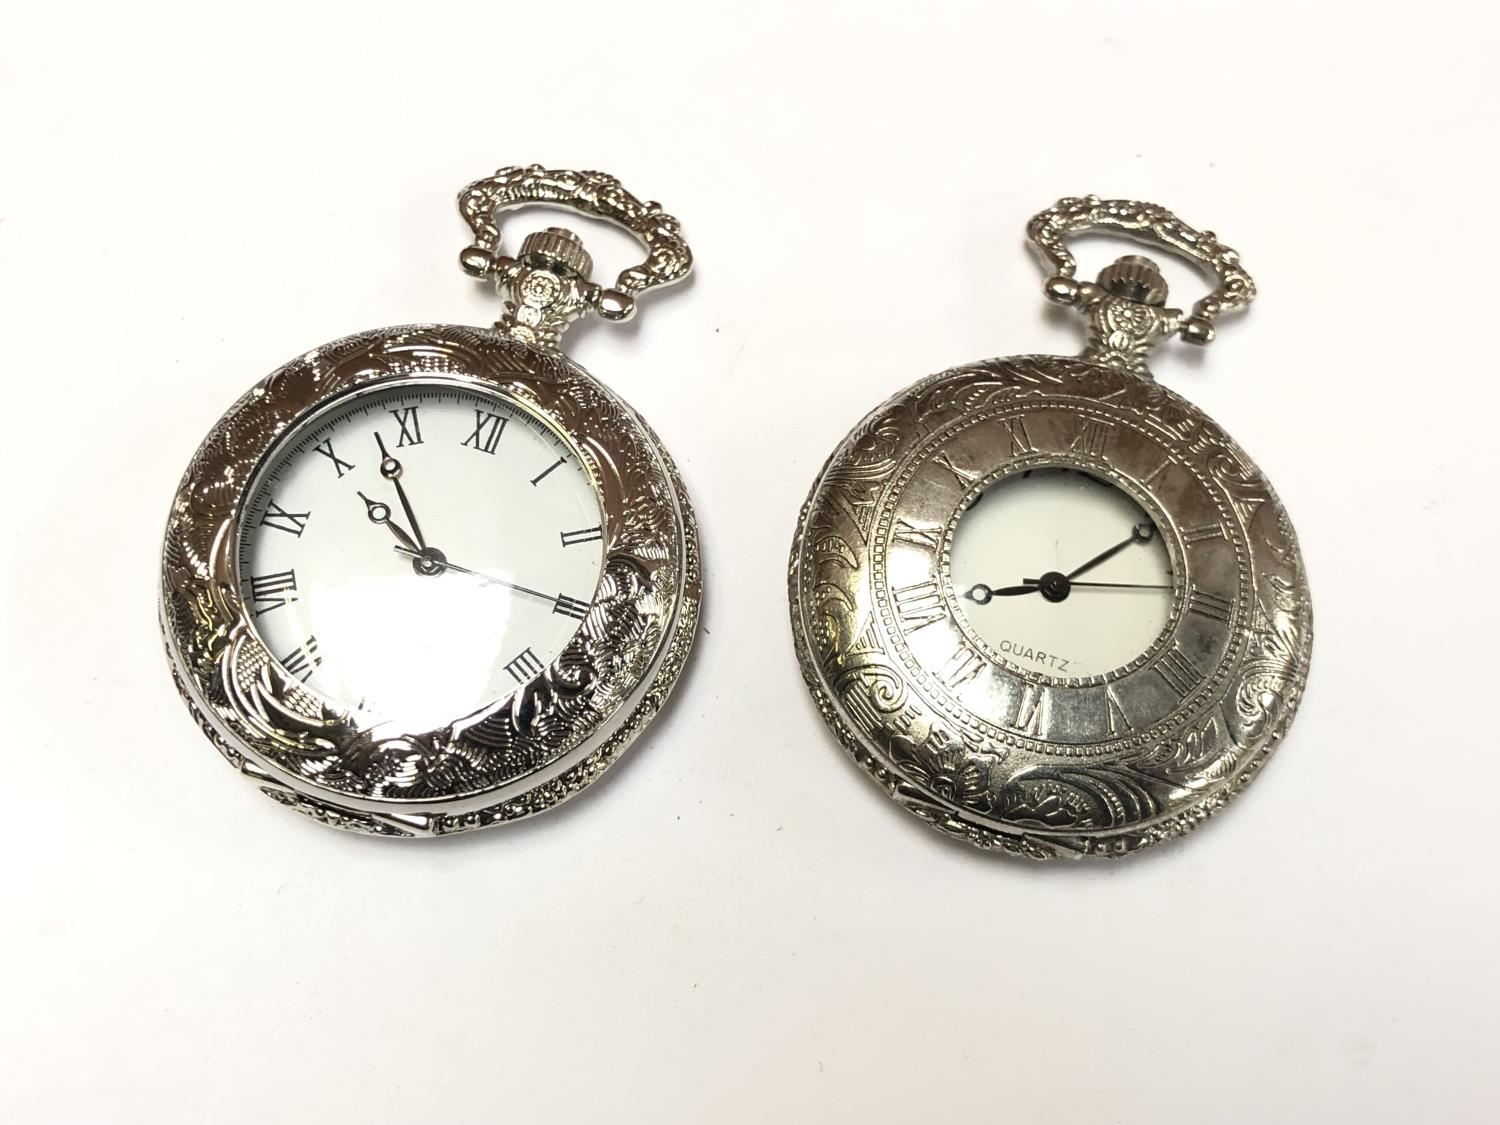 TWO MODERN COLLECTABLE POCKET WATCHES